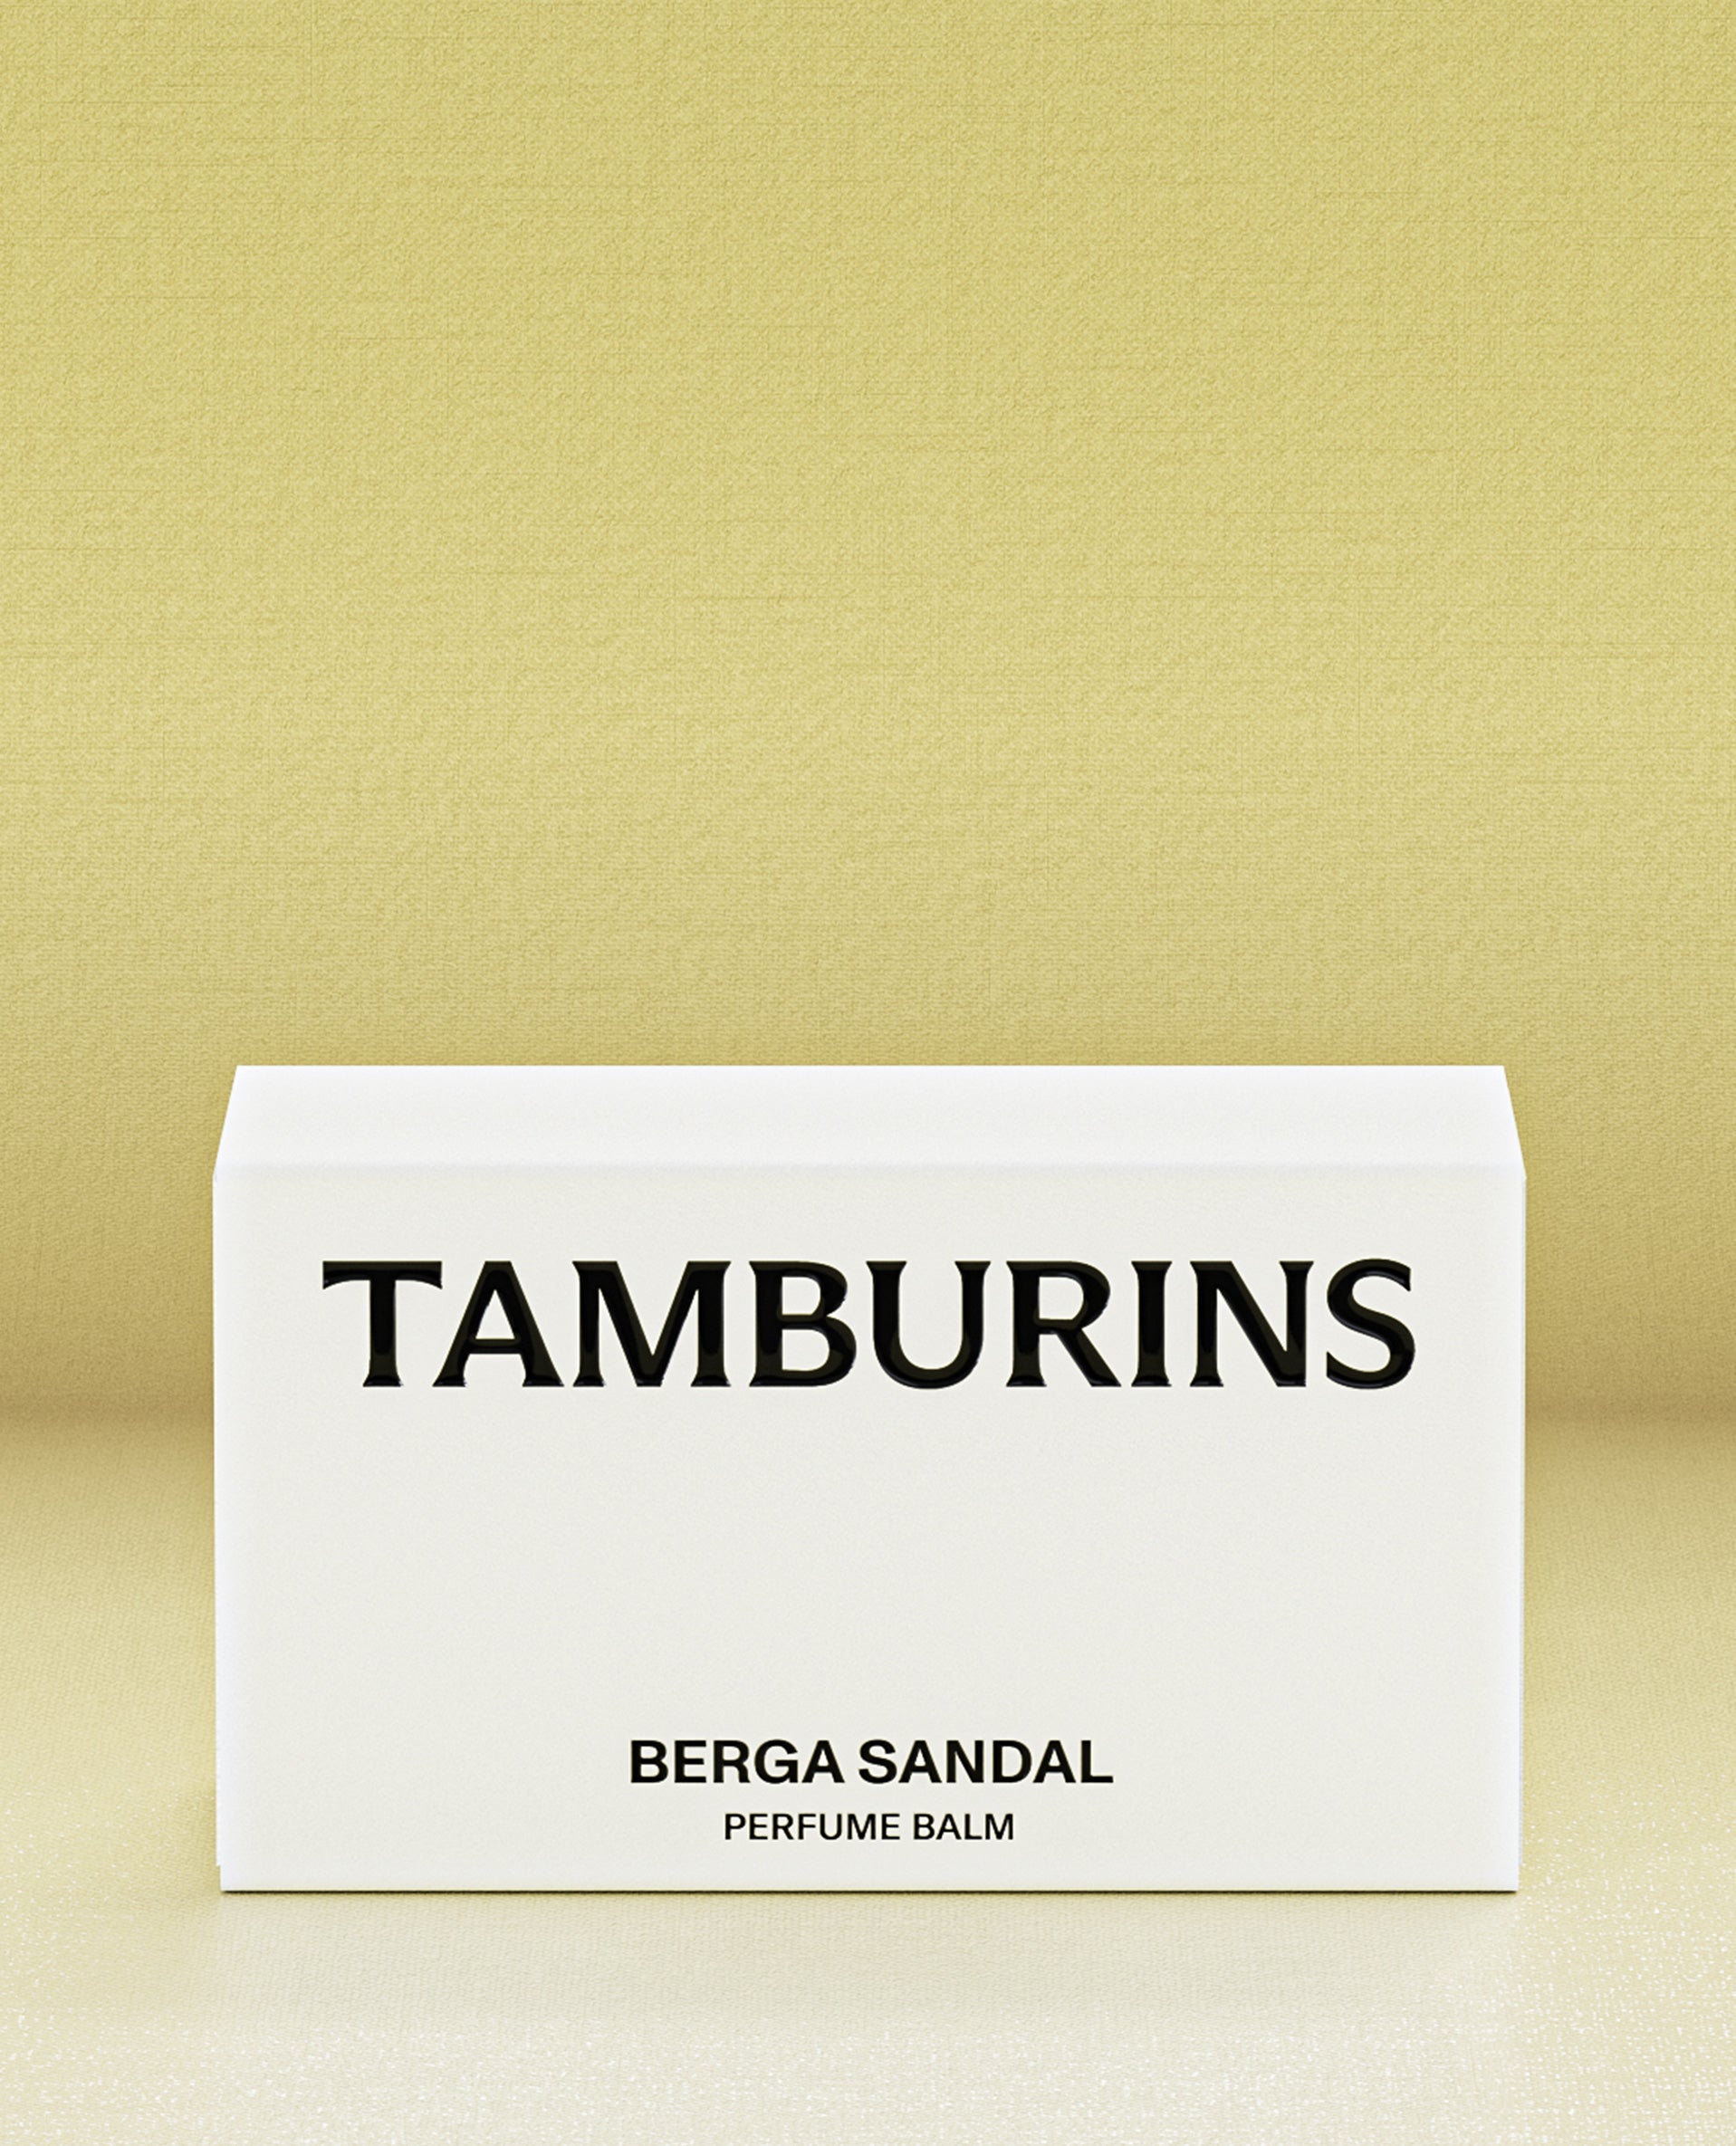 TAMBURINS Perfume Balm Berga Sandal 6.5g - a 6.5g balm in a stylish container, featuring a captivating Berga Sandal aroma.